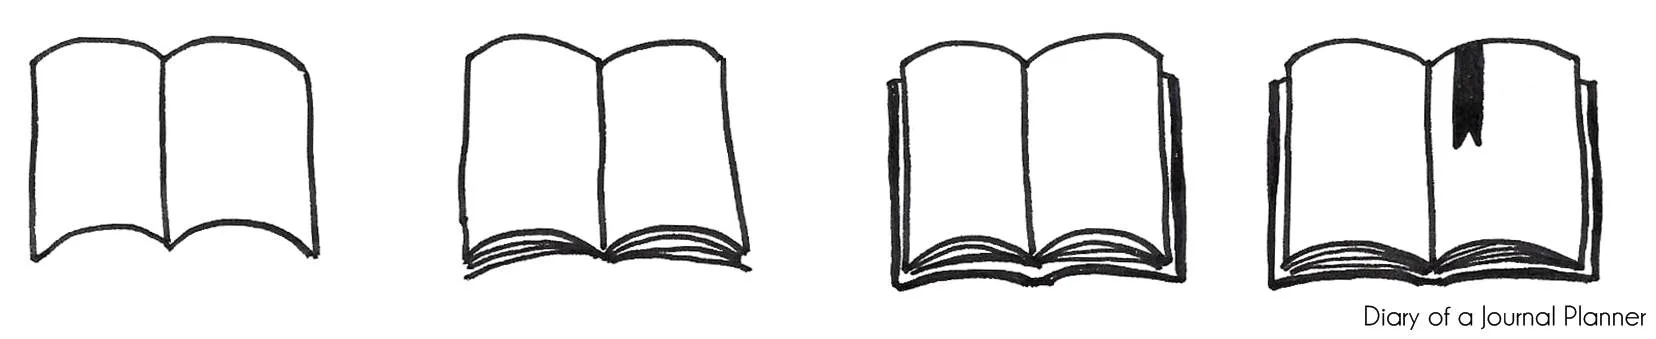 how to draw a book open